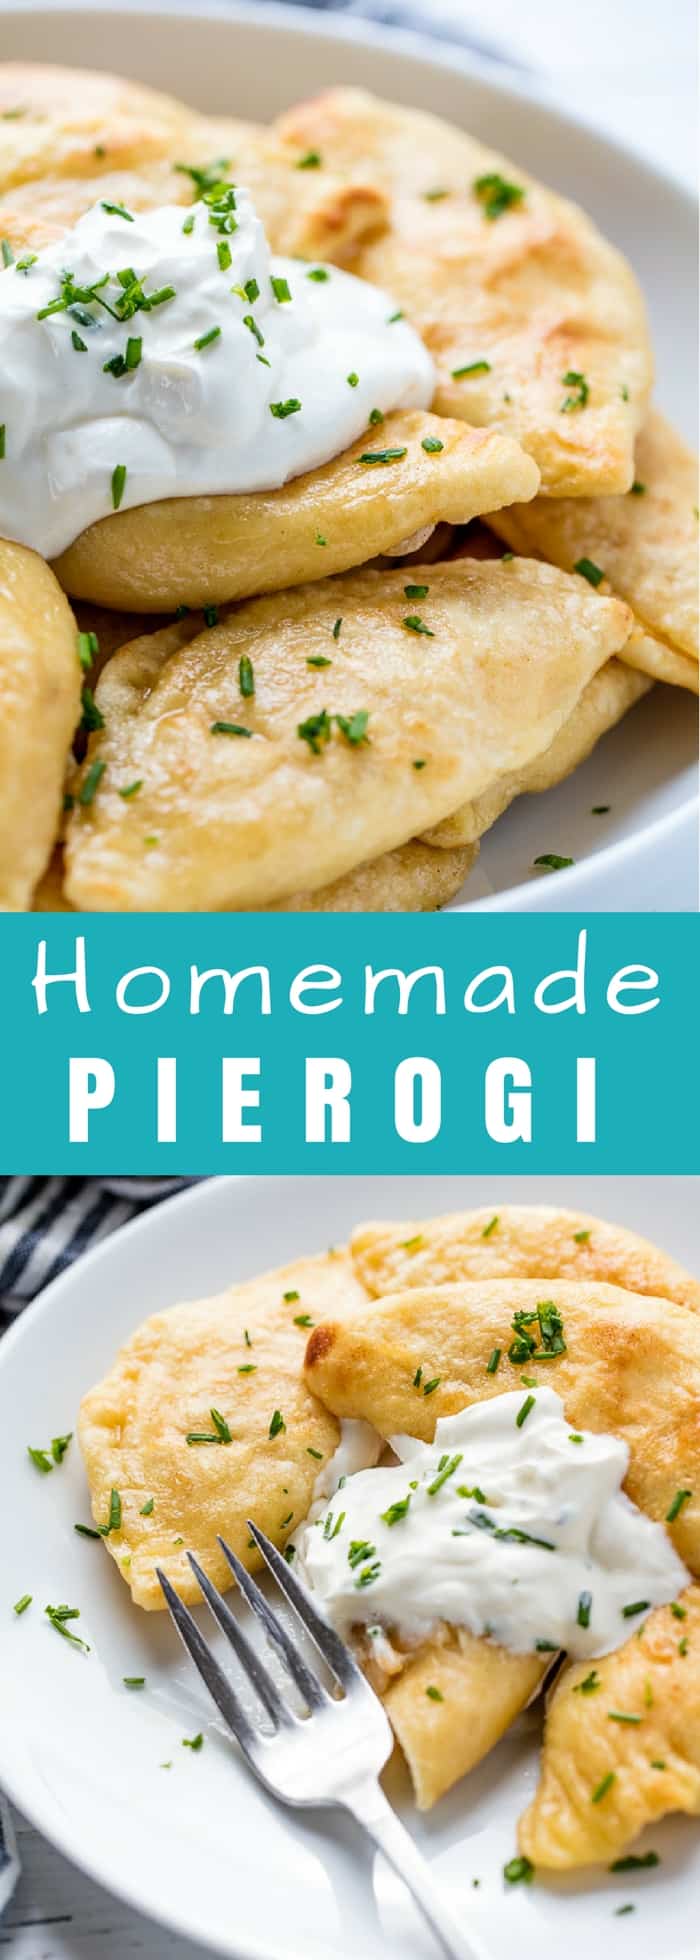 Homemade Pierogi are stuffed with a flavorful potato and cheese mixture, boiled, and fried up in melted butter for a delicious, indulgent, total comfort food dinner. 